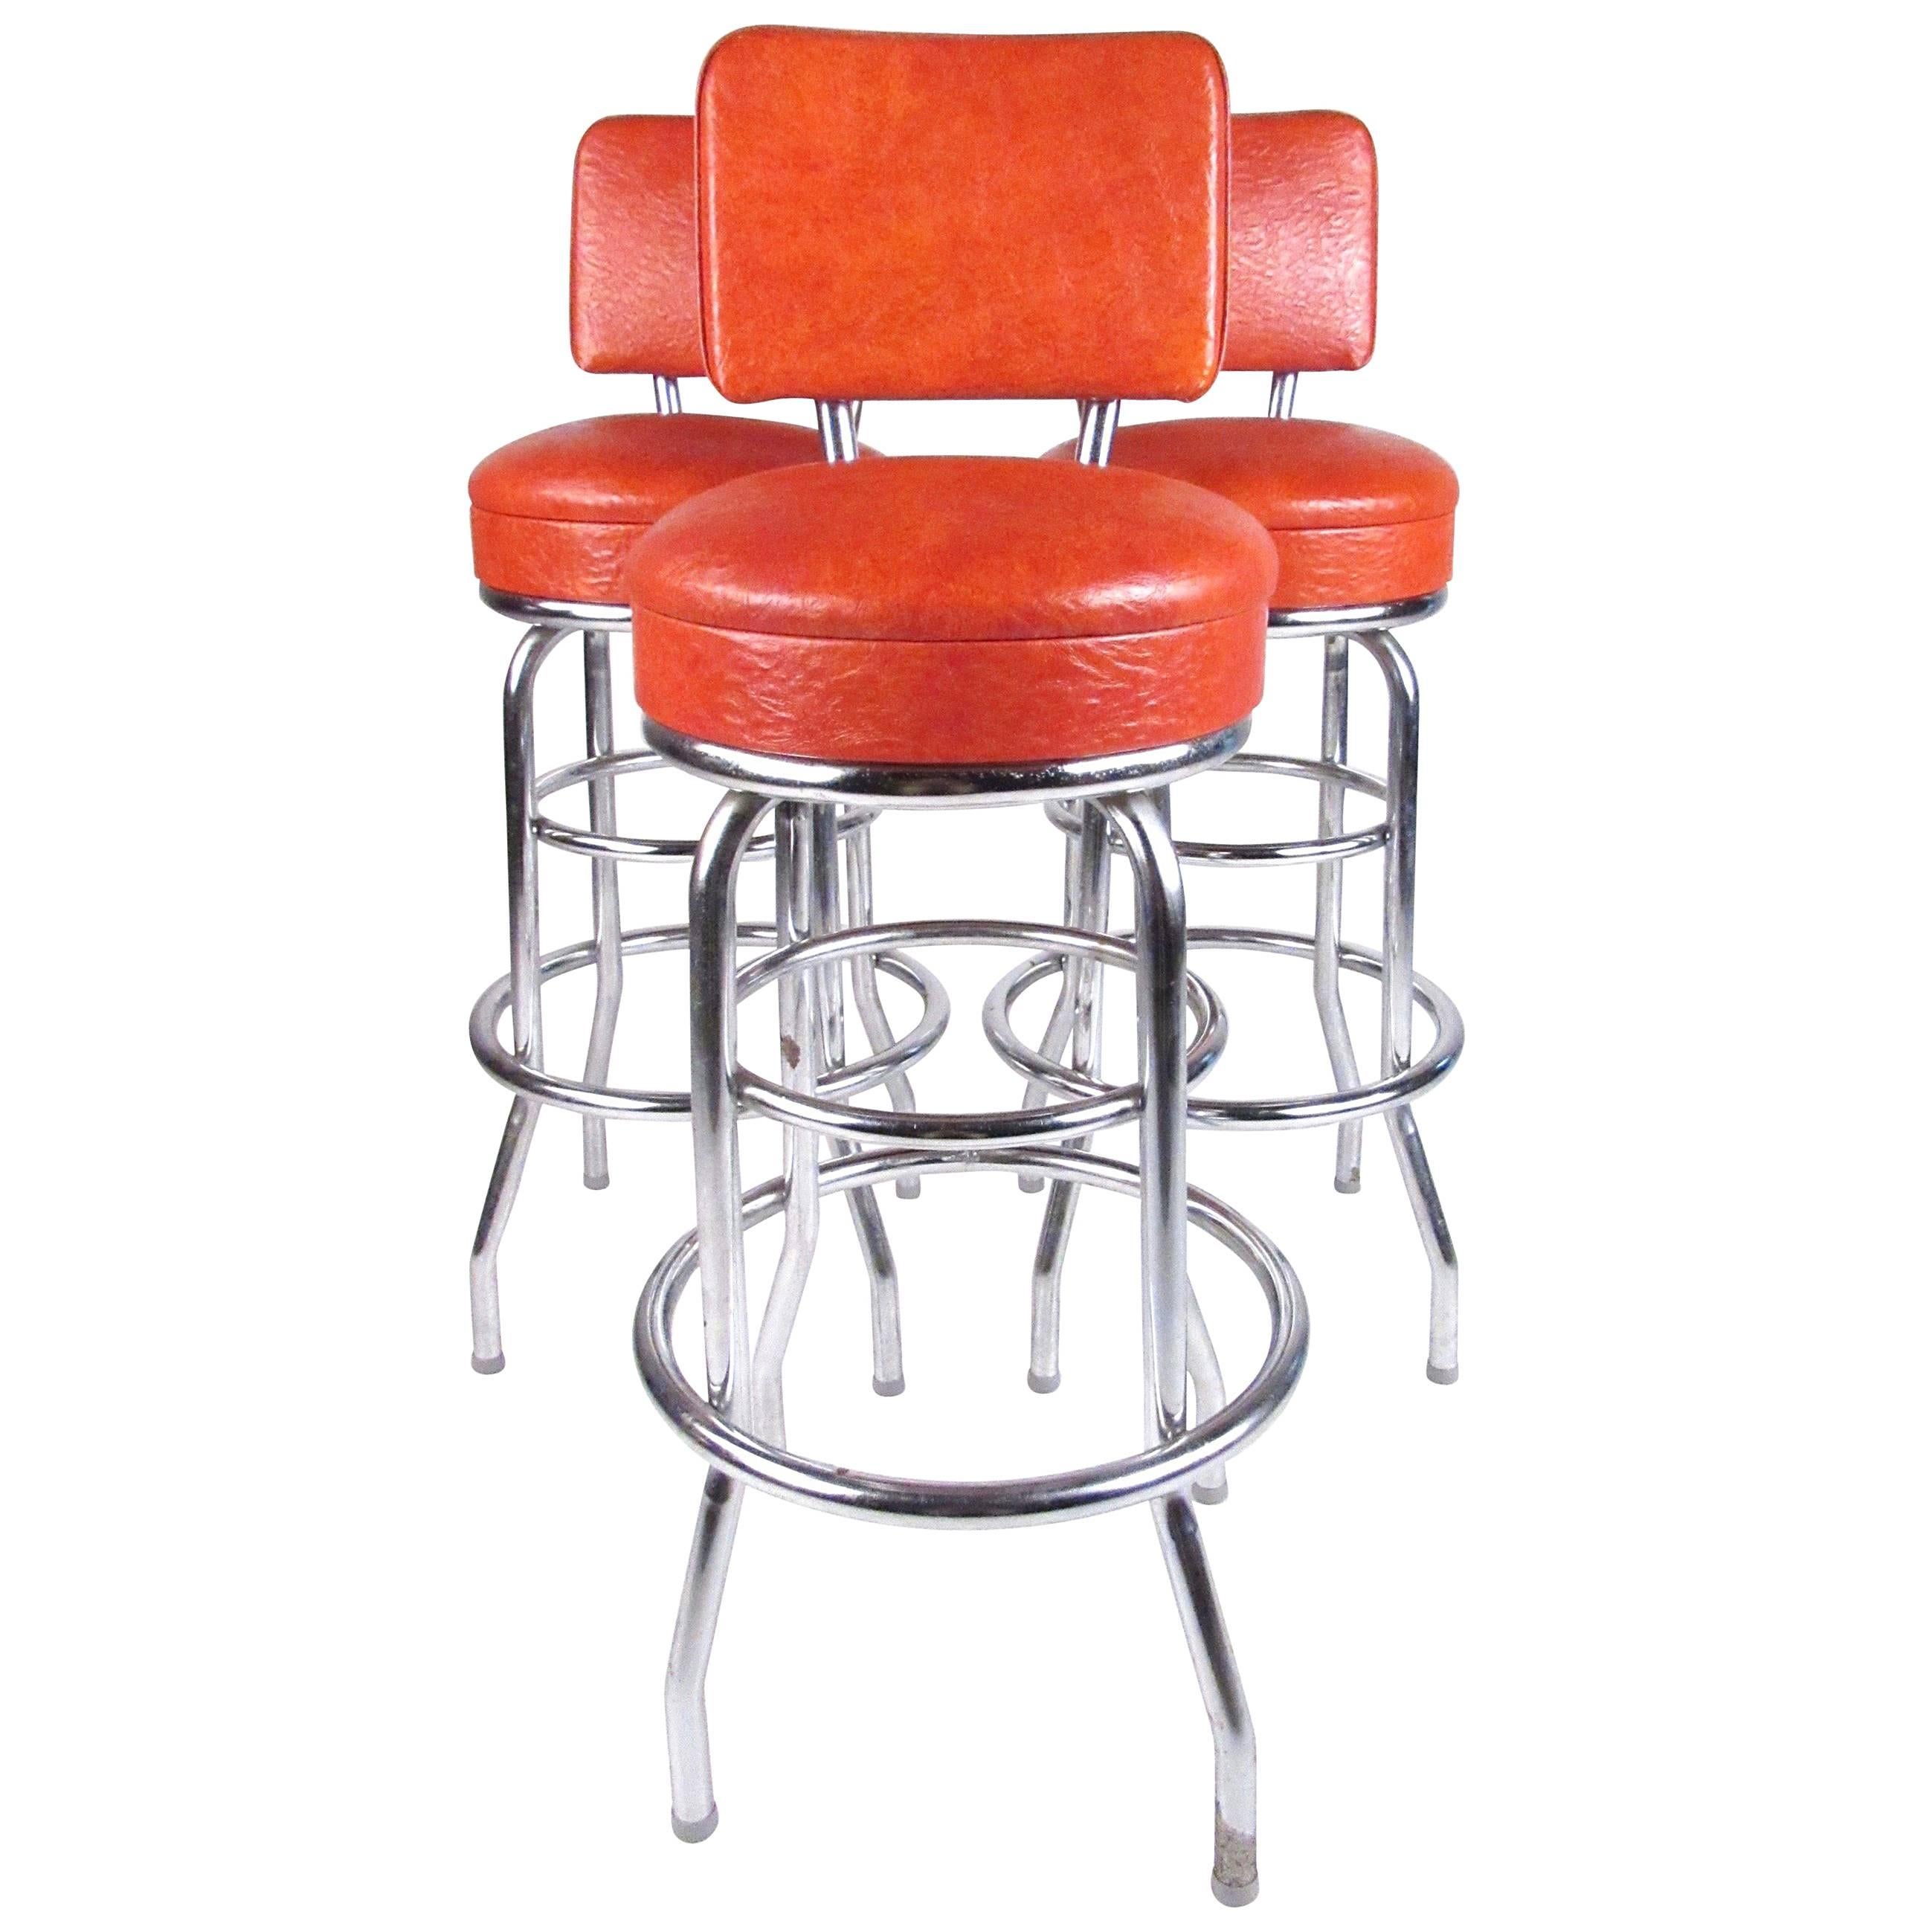 This stylish retro set of vintage modern bar stools feature vinyl swivel seats, sturdy metal frames, and circular metal footrest. Perfect set of bar height stools for home or business bar seating. 
Please confirm item location (NY or NJ).